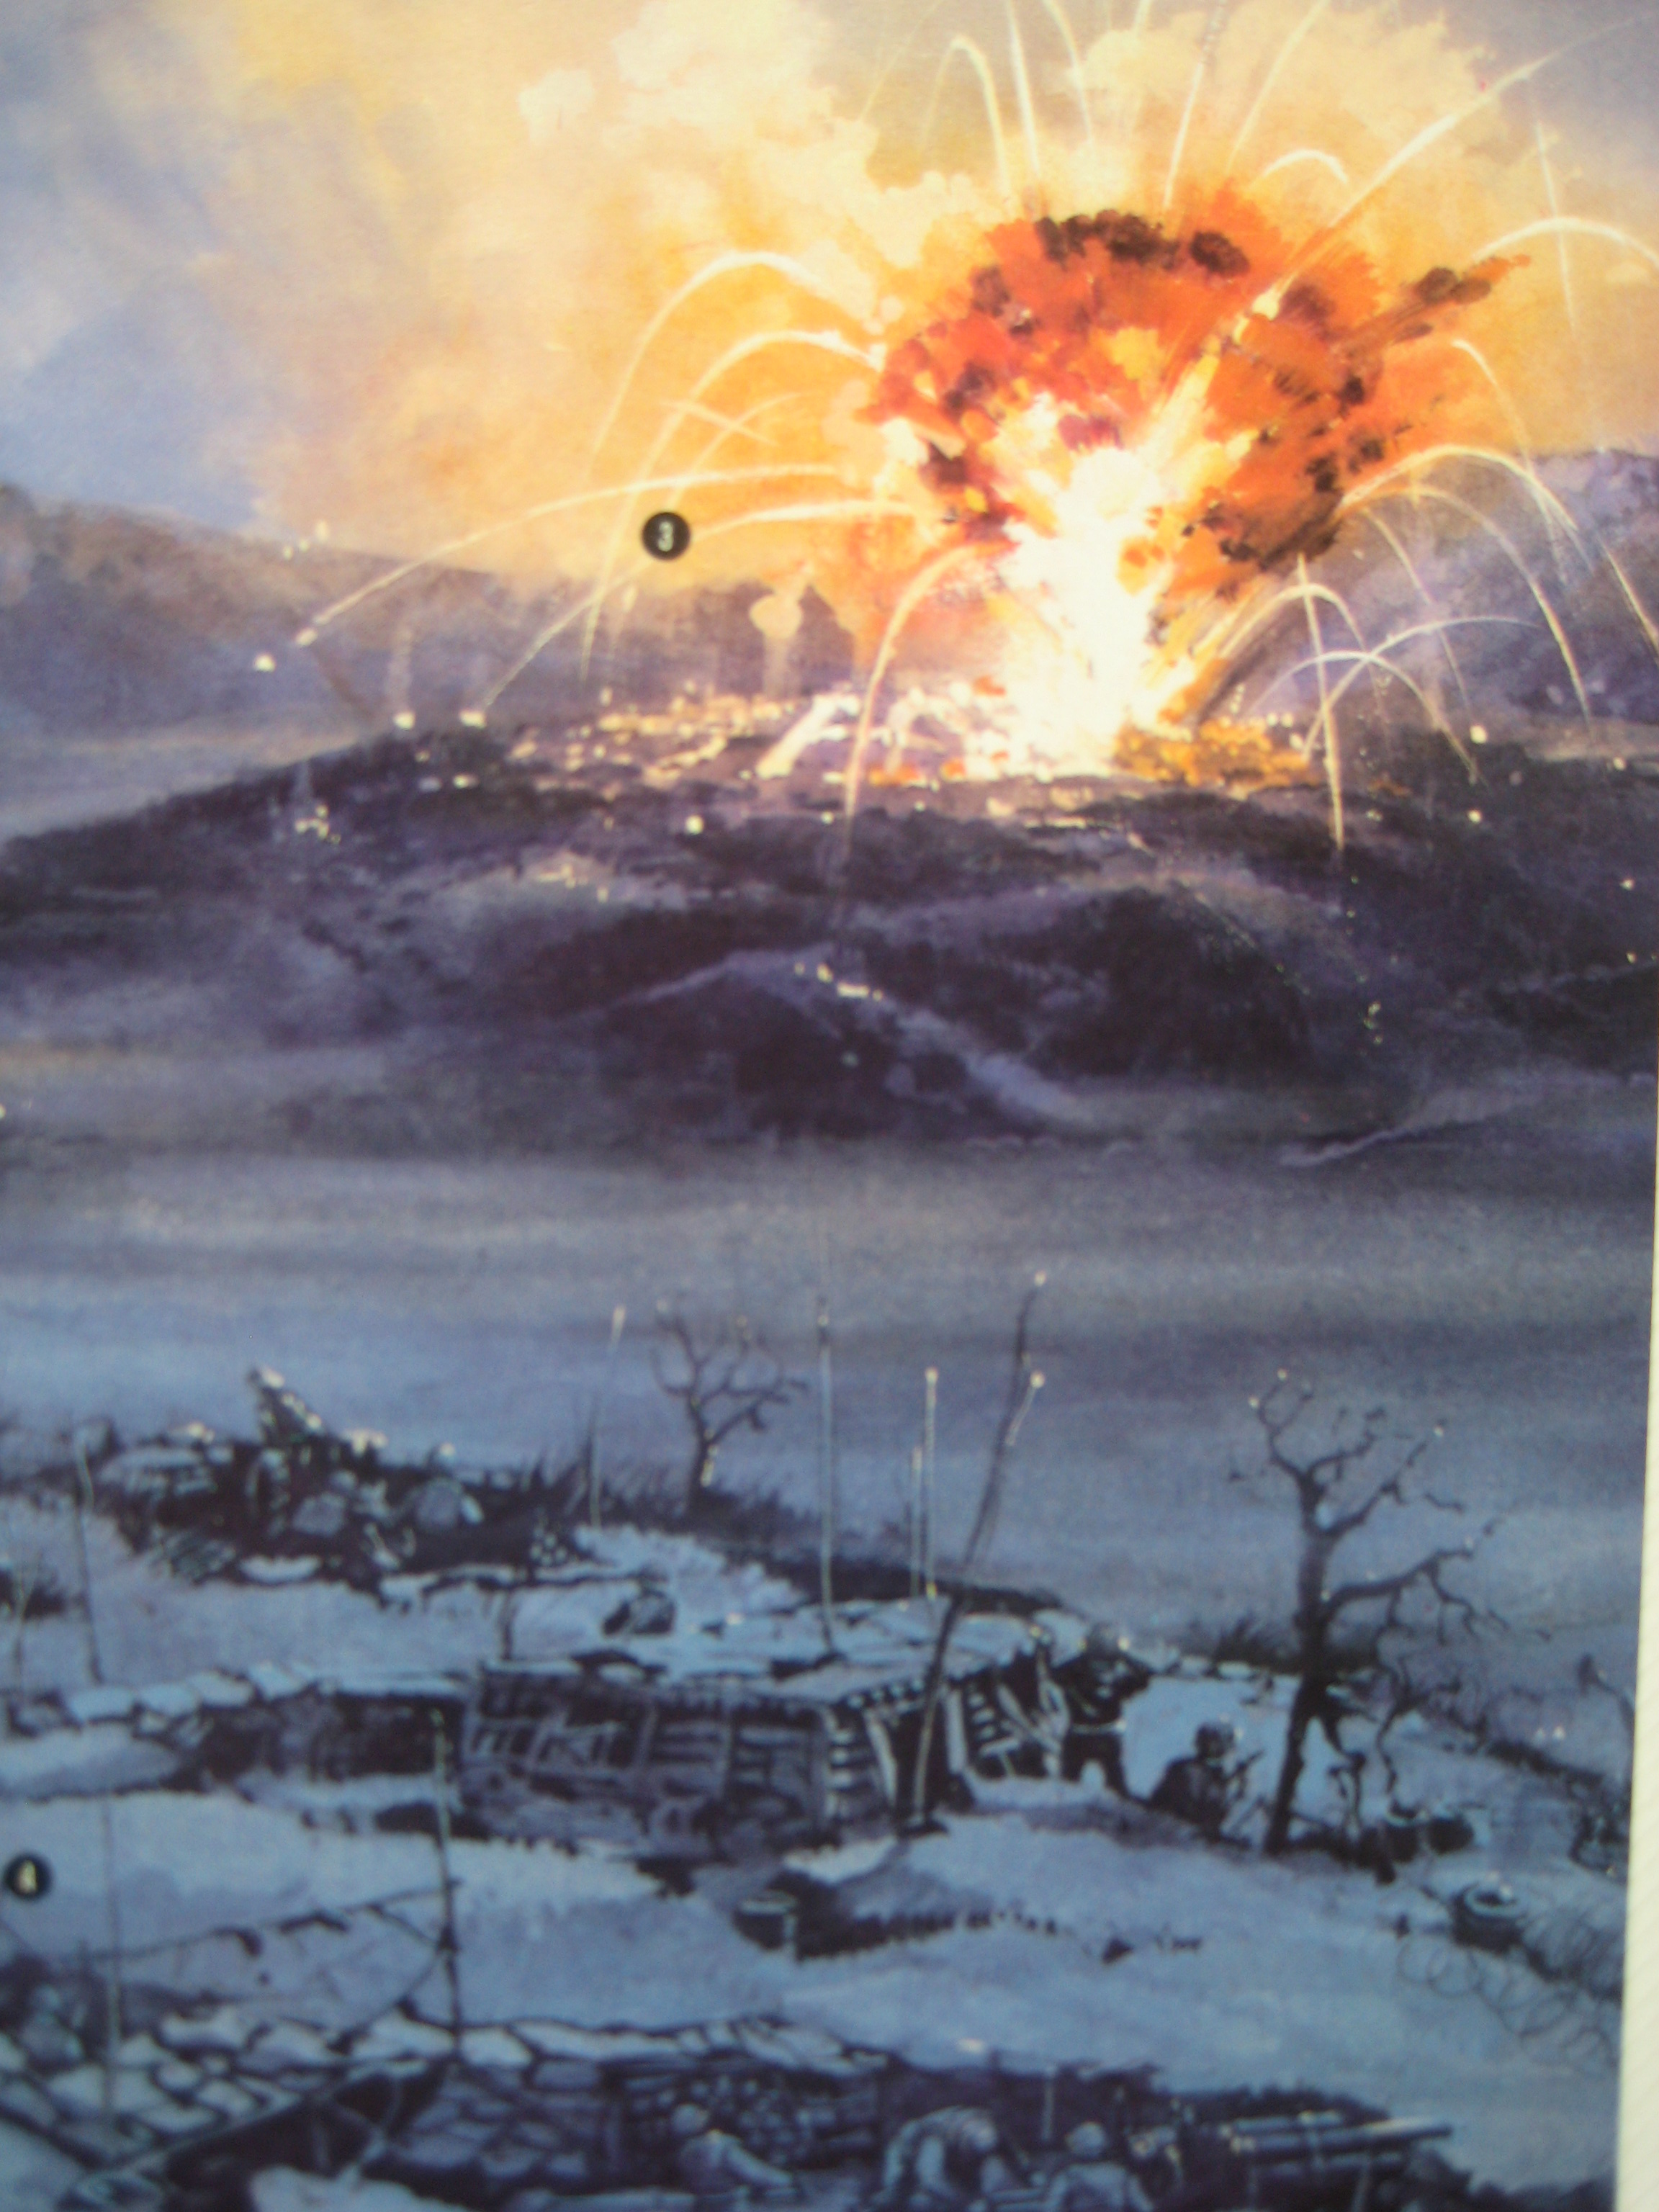 Explosion of ammunition caused by enemy fire